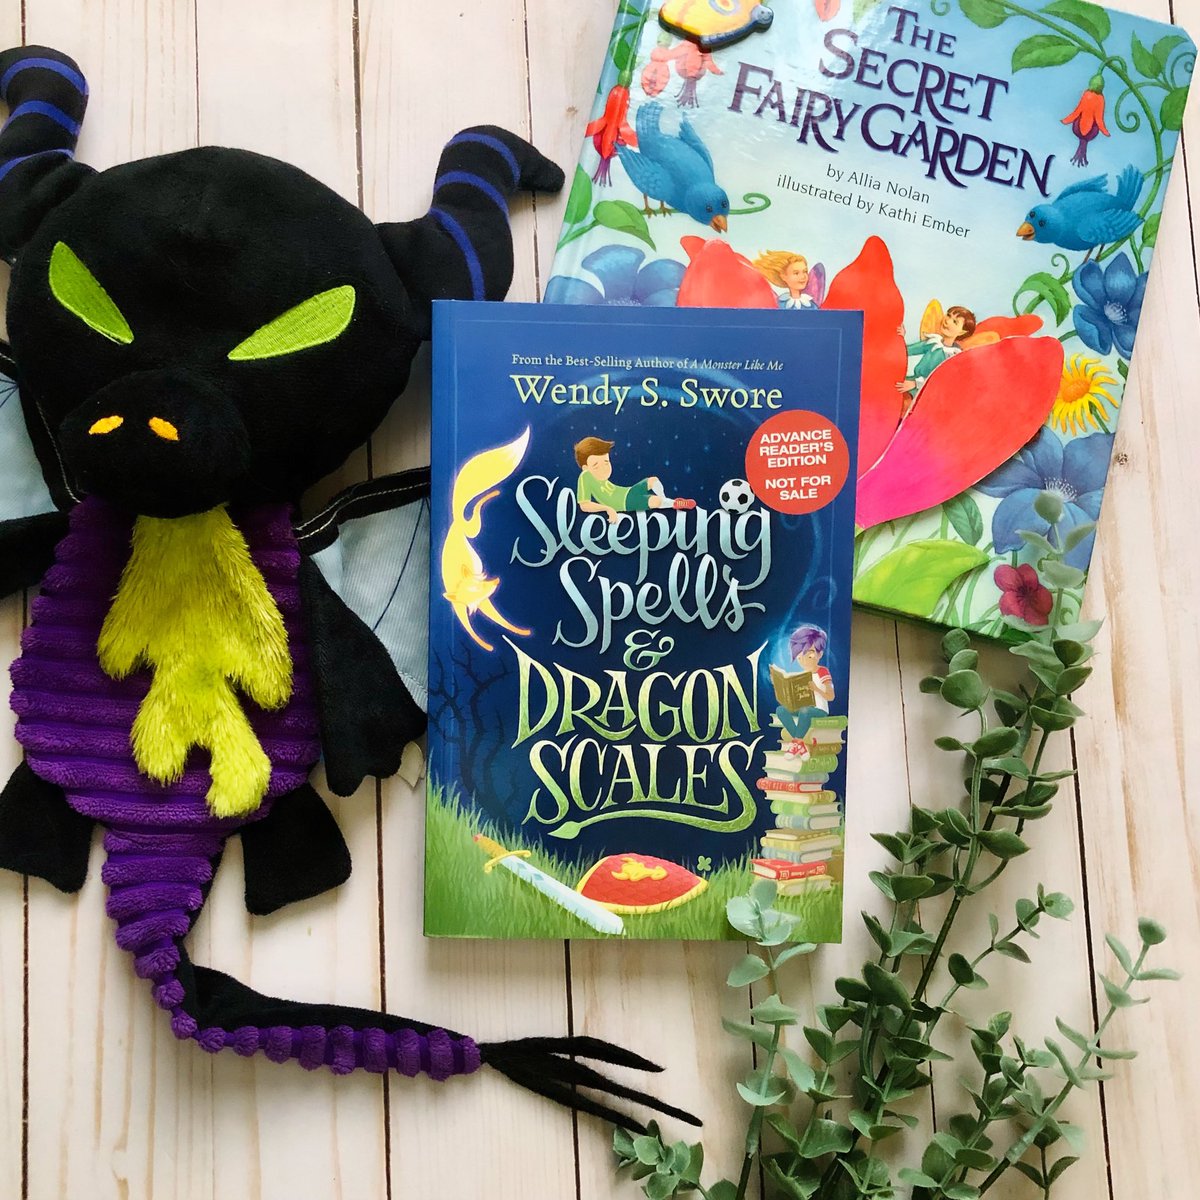 Check out this creative, chronic illness rep Middle Grade fiction!  instagram.com/p/C5d9pnkx1me/… Now available here: a.co/d/bifLaFw #middlegradefiction #sleepingspellsanddragonspells #wendysswore #kidsbooks @ShadowMountn #newbook #kidsfiction #childrensbooks #BookTwitter